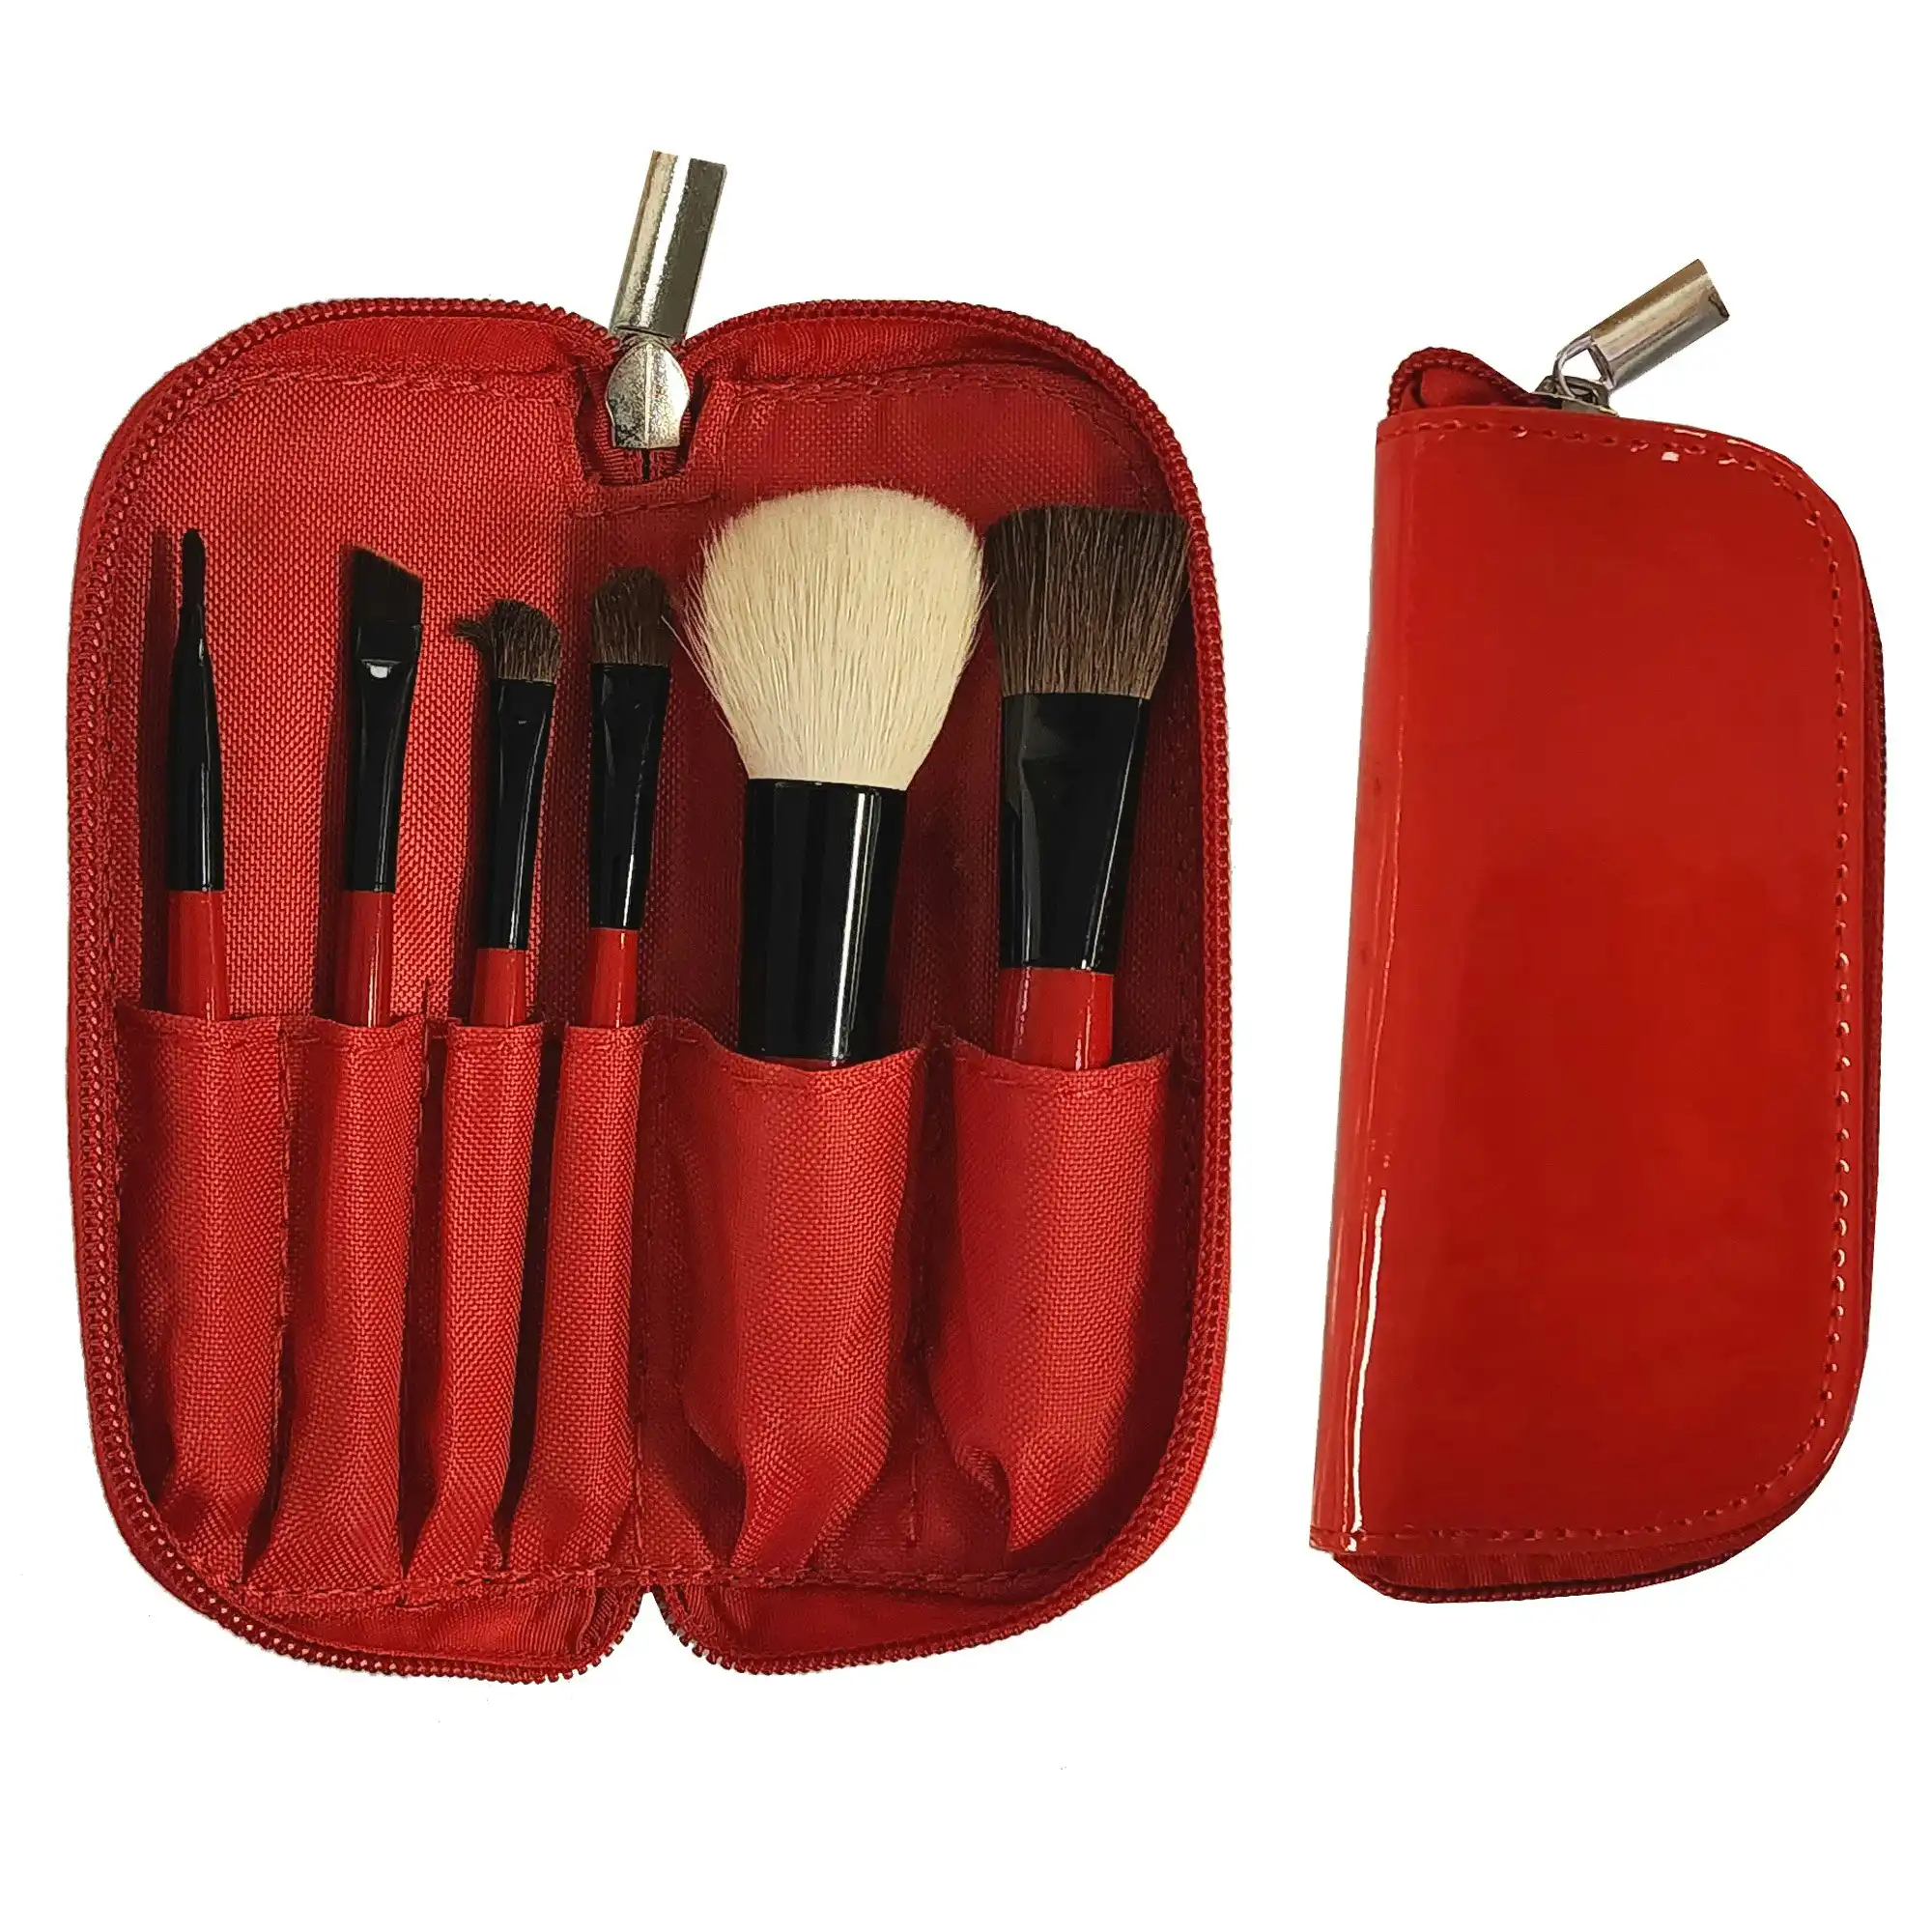 6 Piece Travel Makeup Brush Set Soft Bristle with Zip Up Carry Case Red